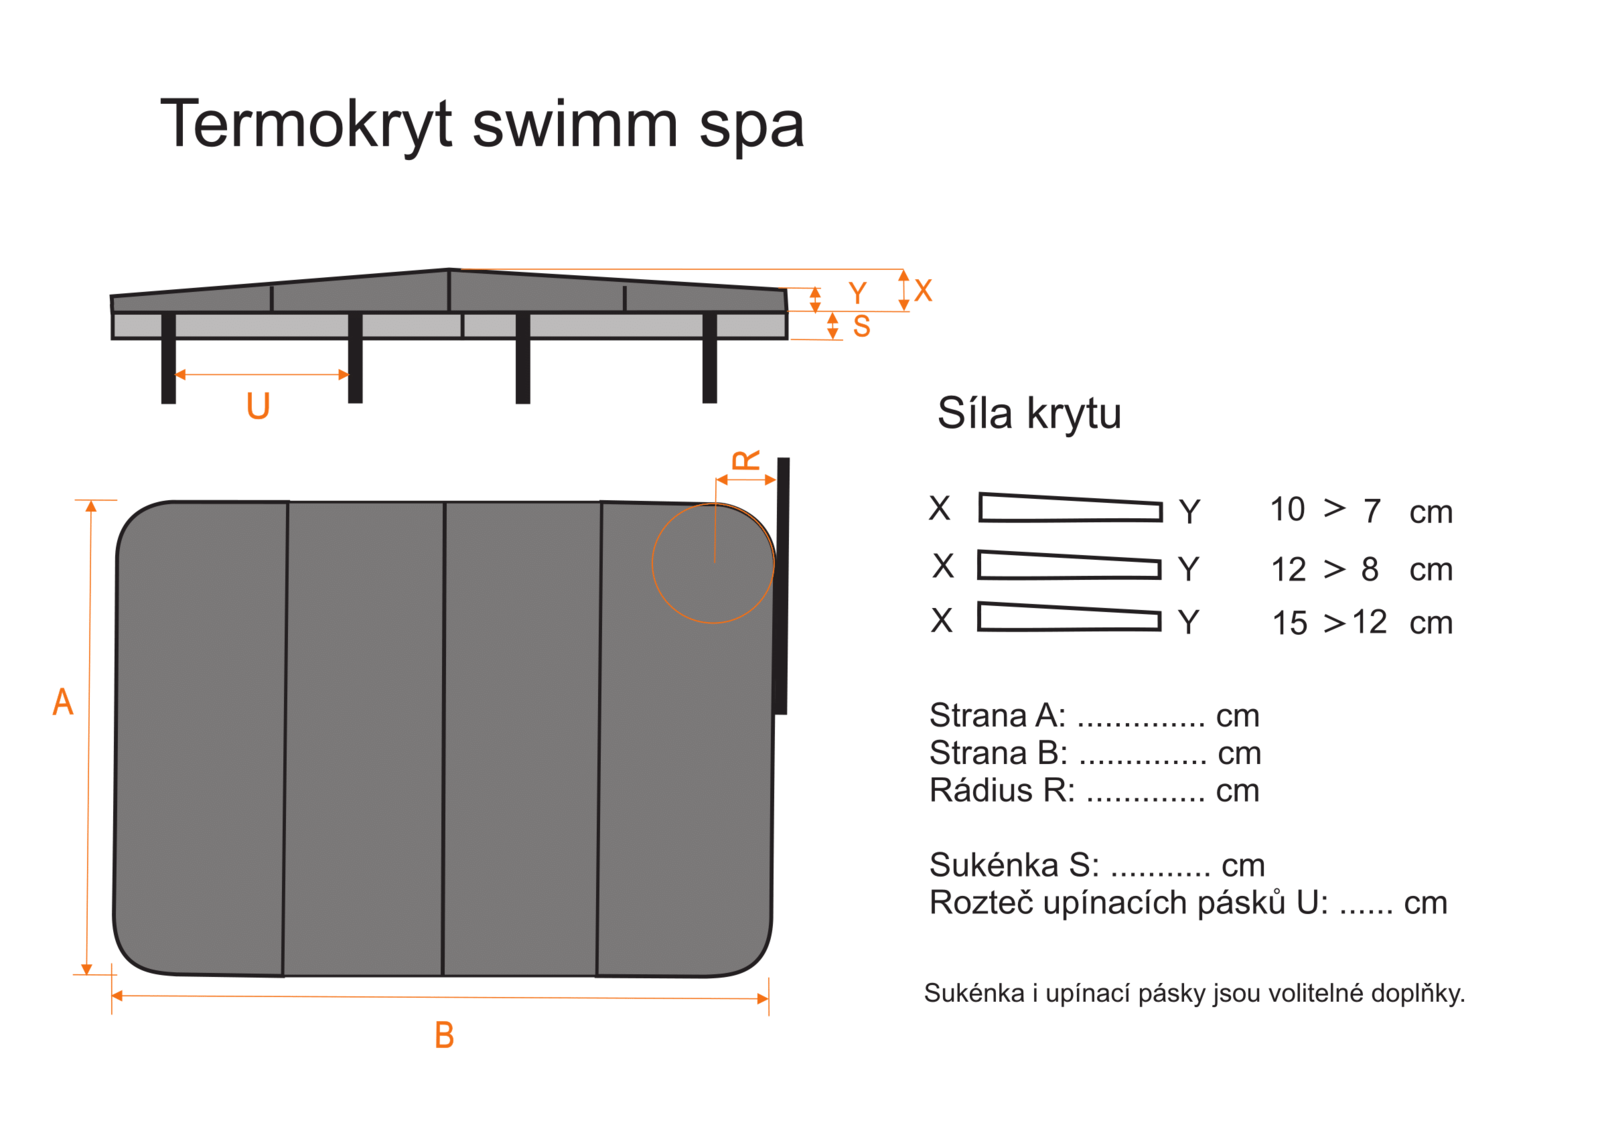 Thermal cover swimm spa